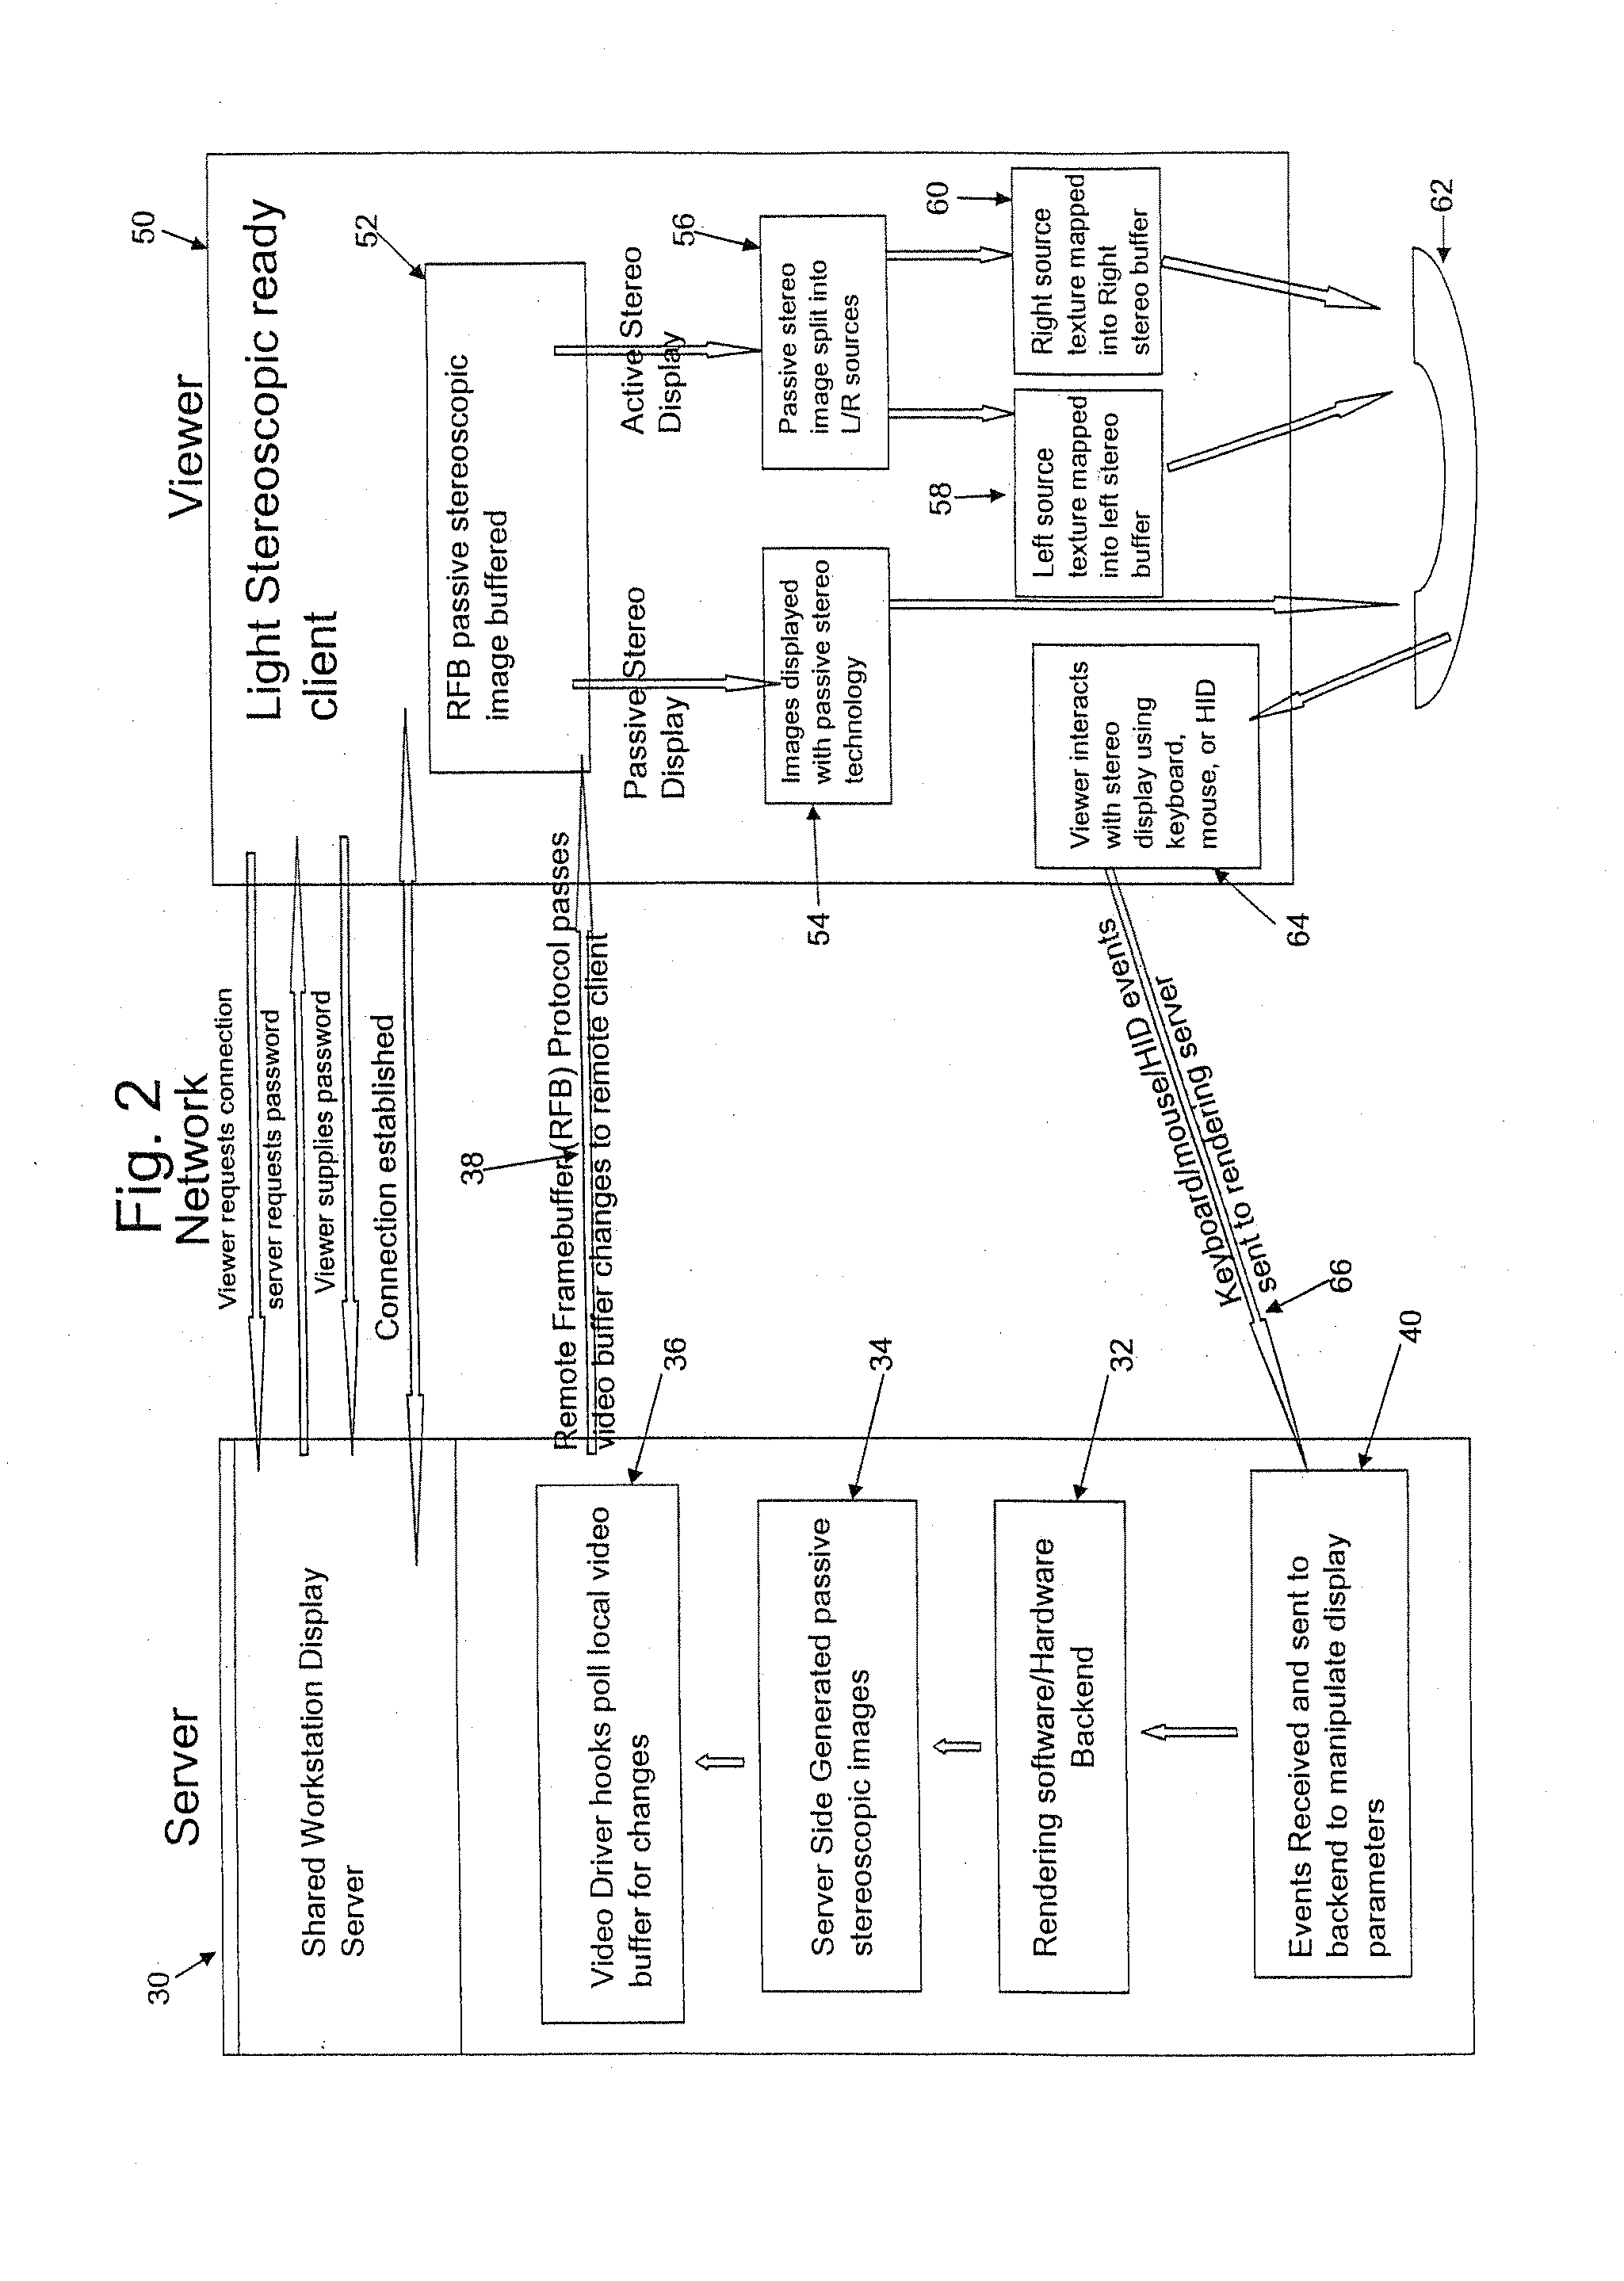 System and methods for multi-dimensional rendering and display of full volumetric data sets